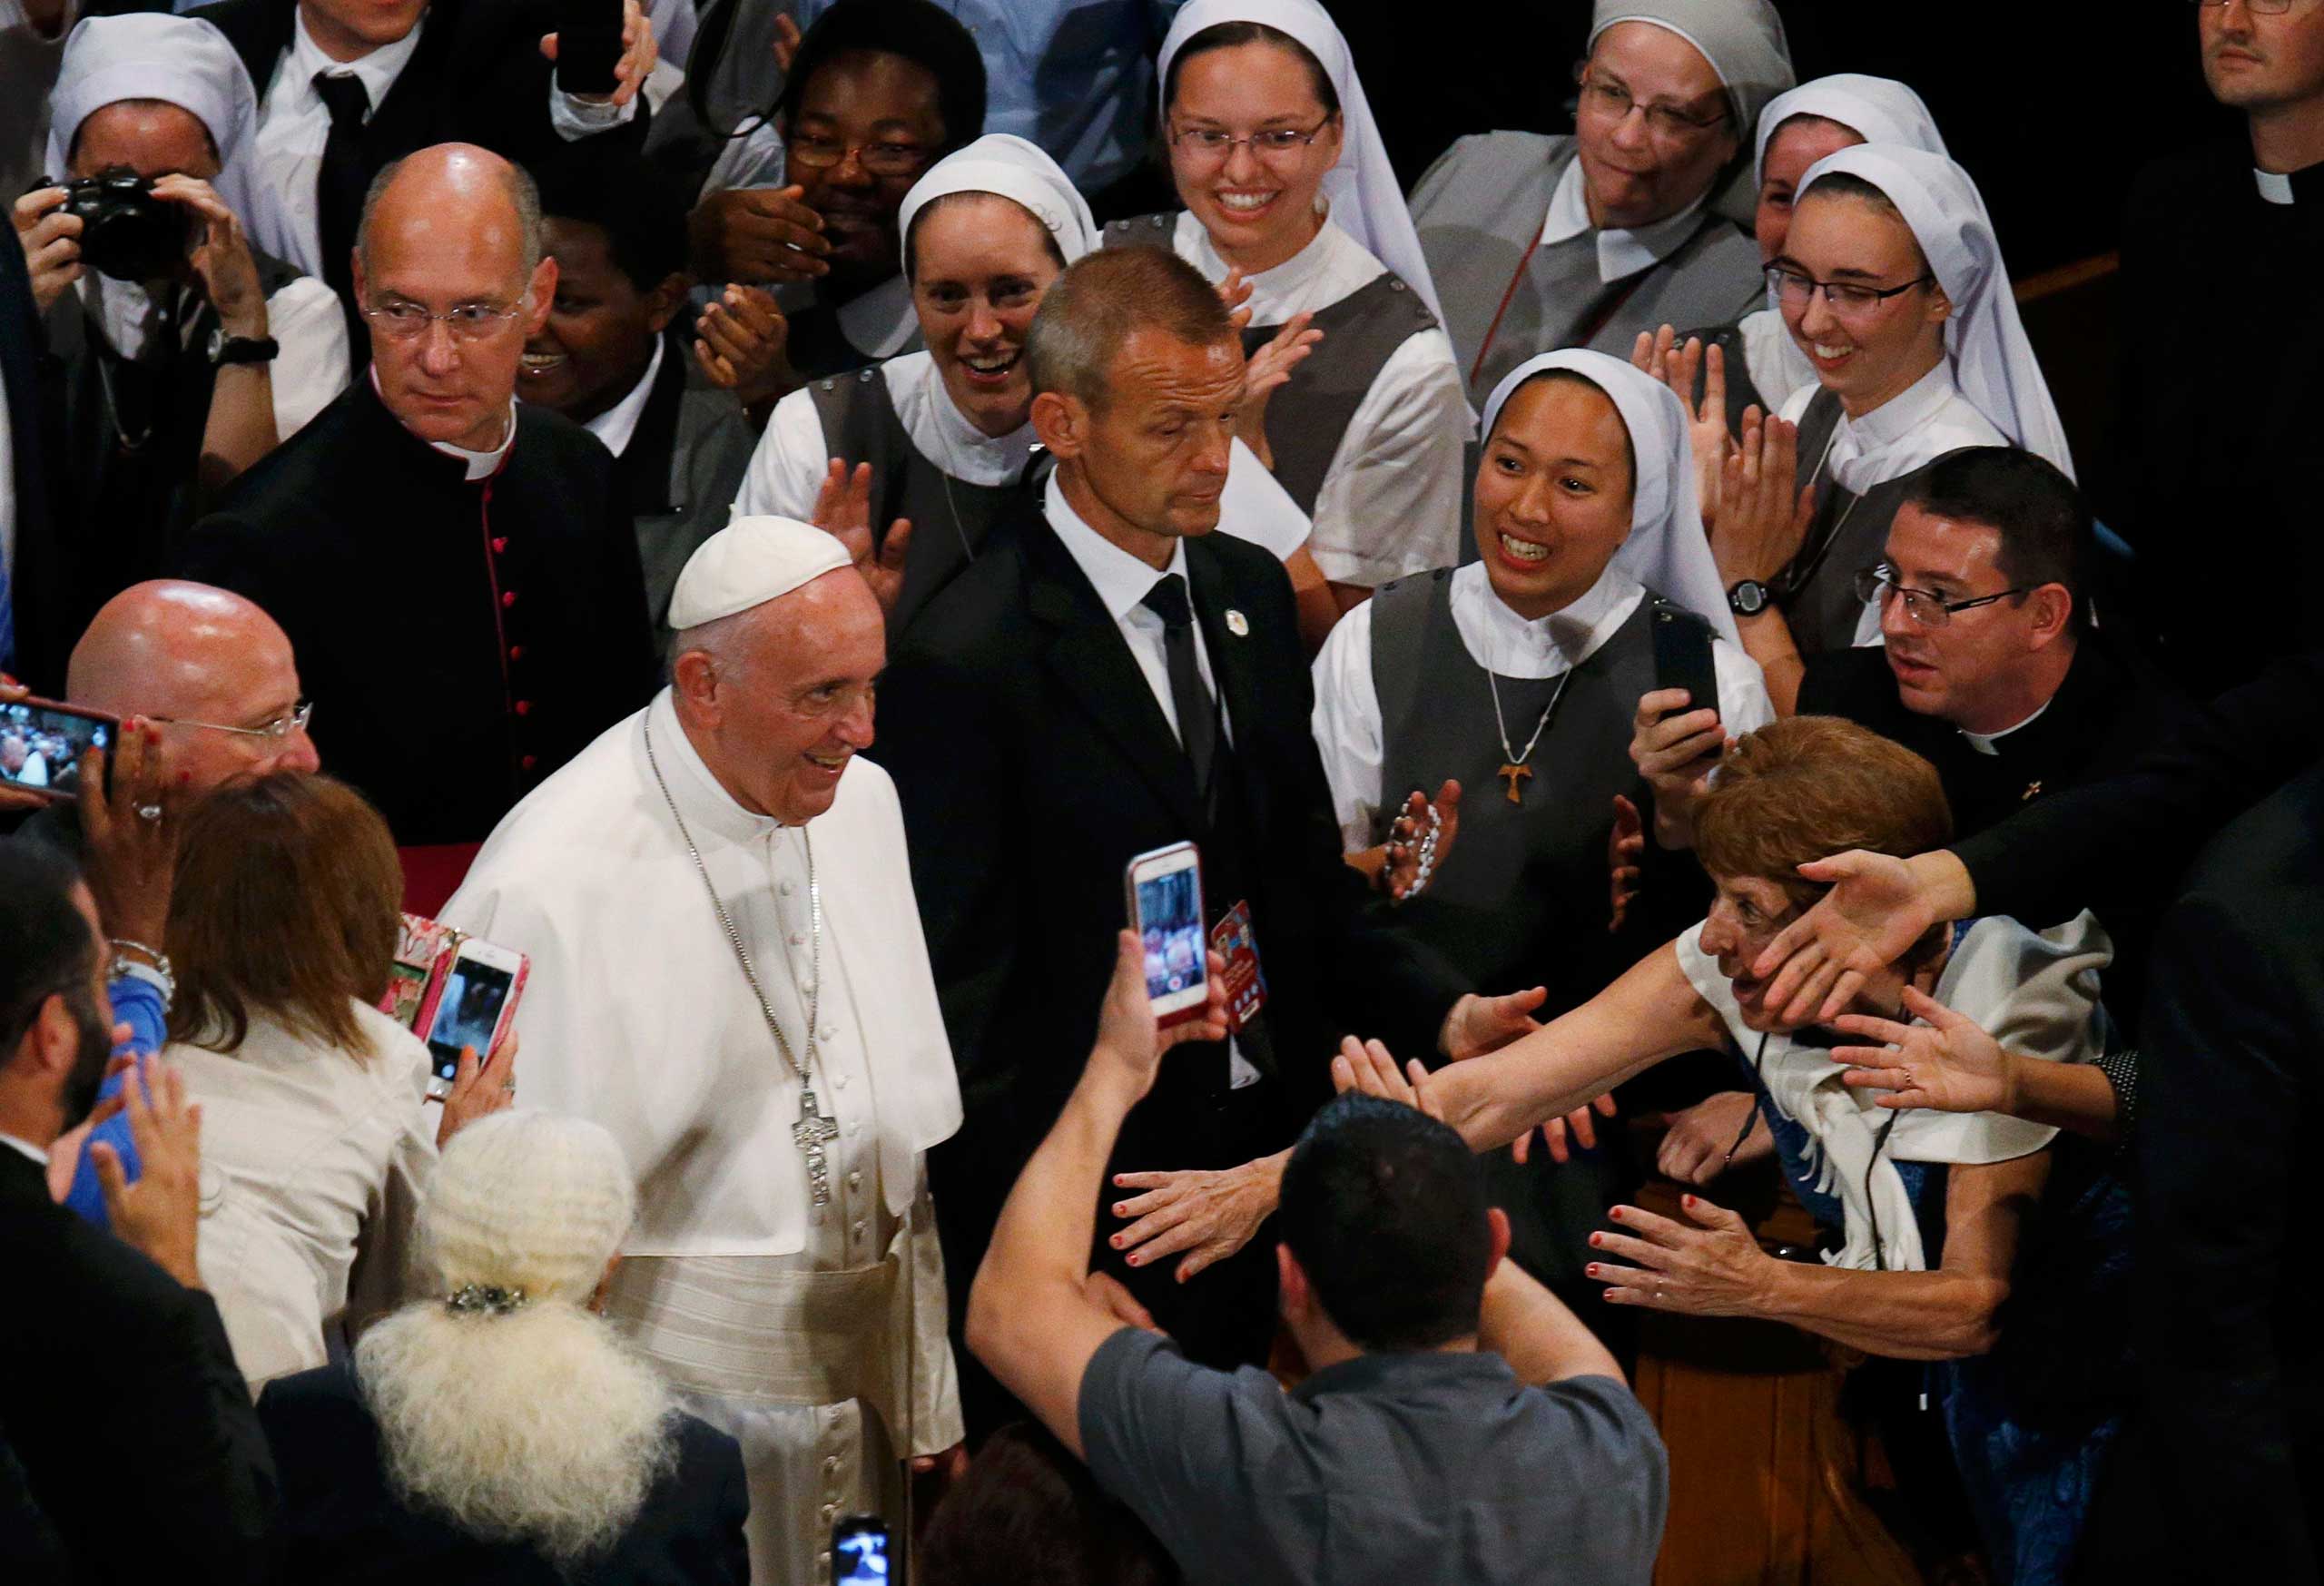 Pope Francis  greets and blesses seminarians, novices, religious guests inside the Basilica of the National Shrine of the Immaculate Conception in Washington, on Sept. 23, 2015. (Jim Bourg—Reuters)